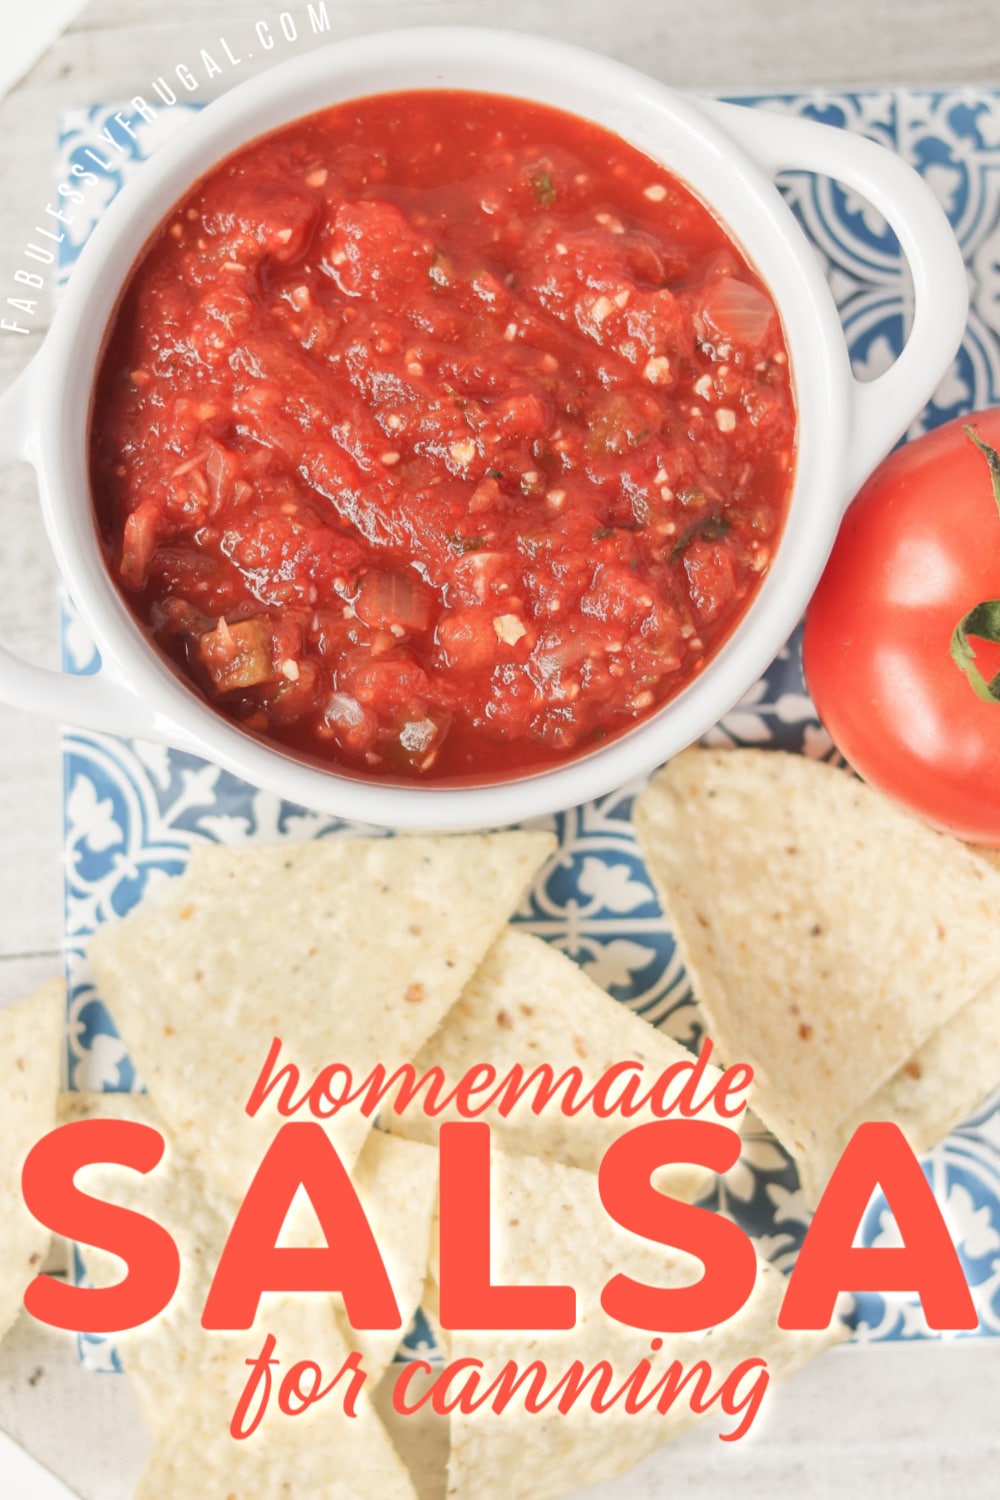 Homemade salsa for canning